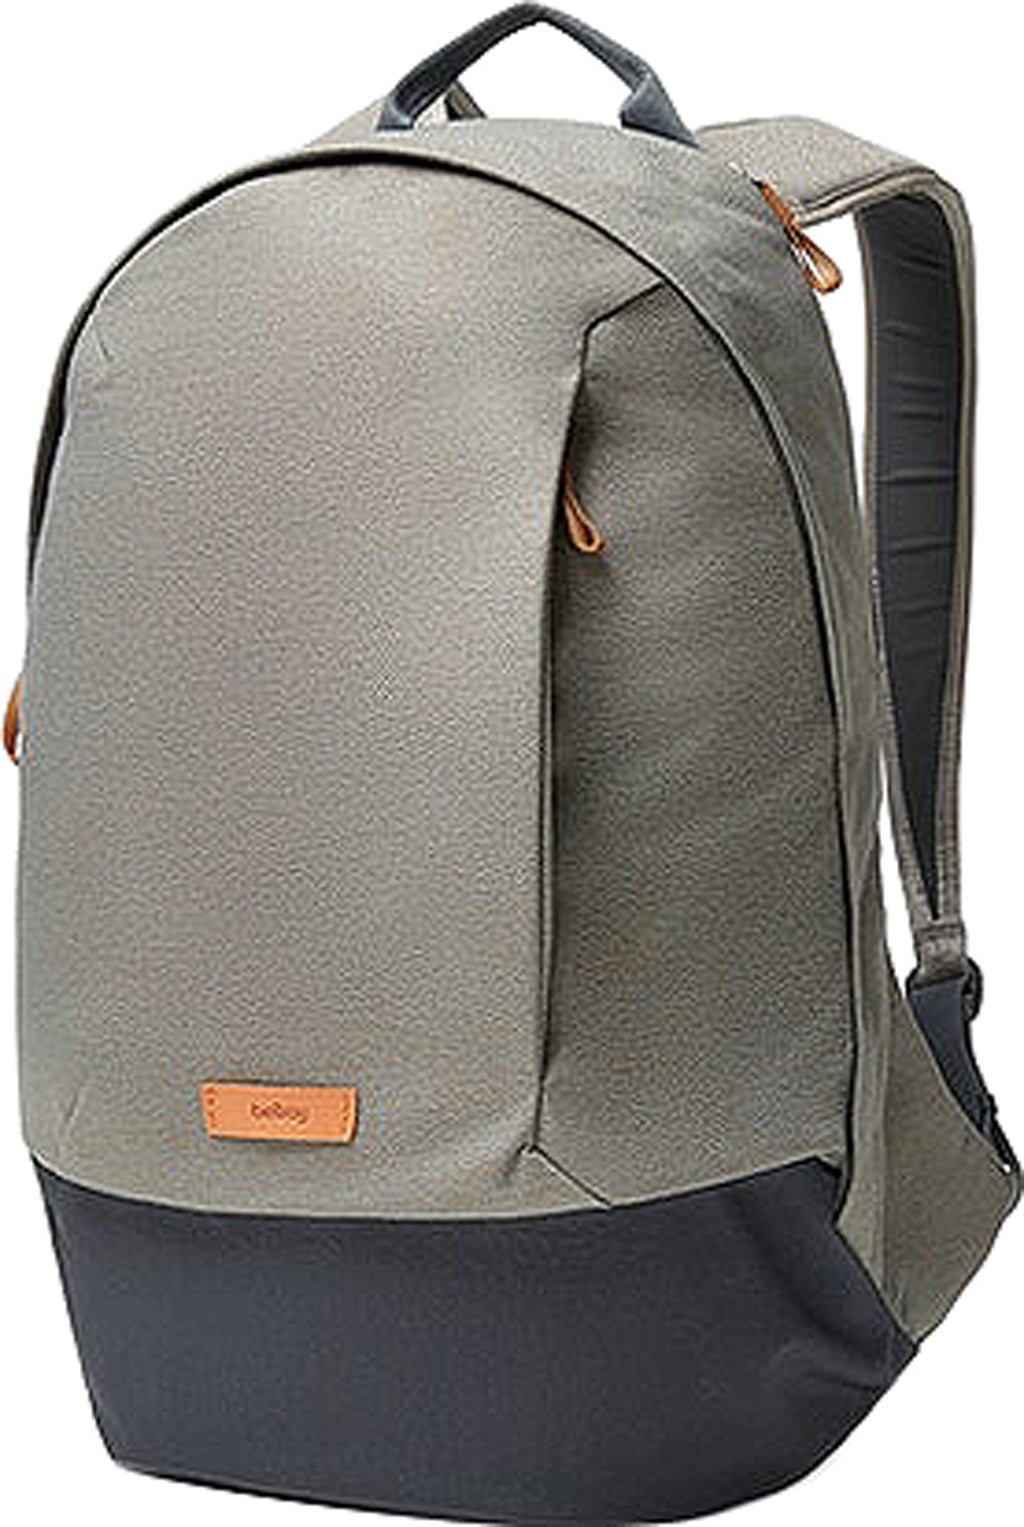 Bellroy Classic Backpack Second Edition Altitude Sports